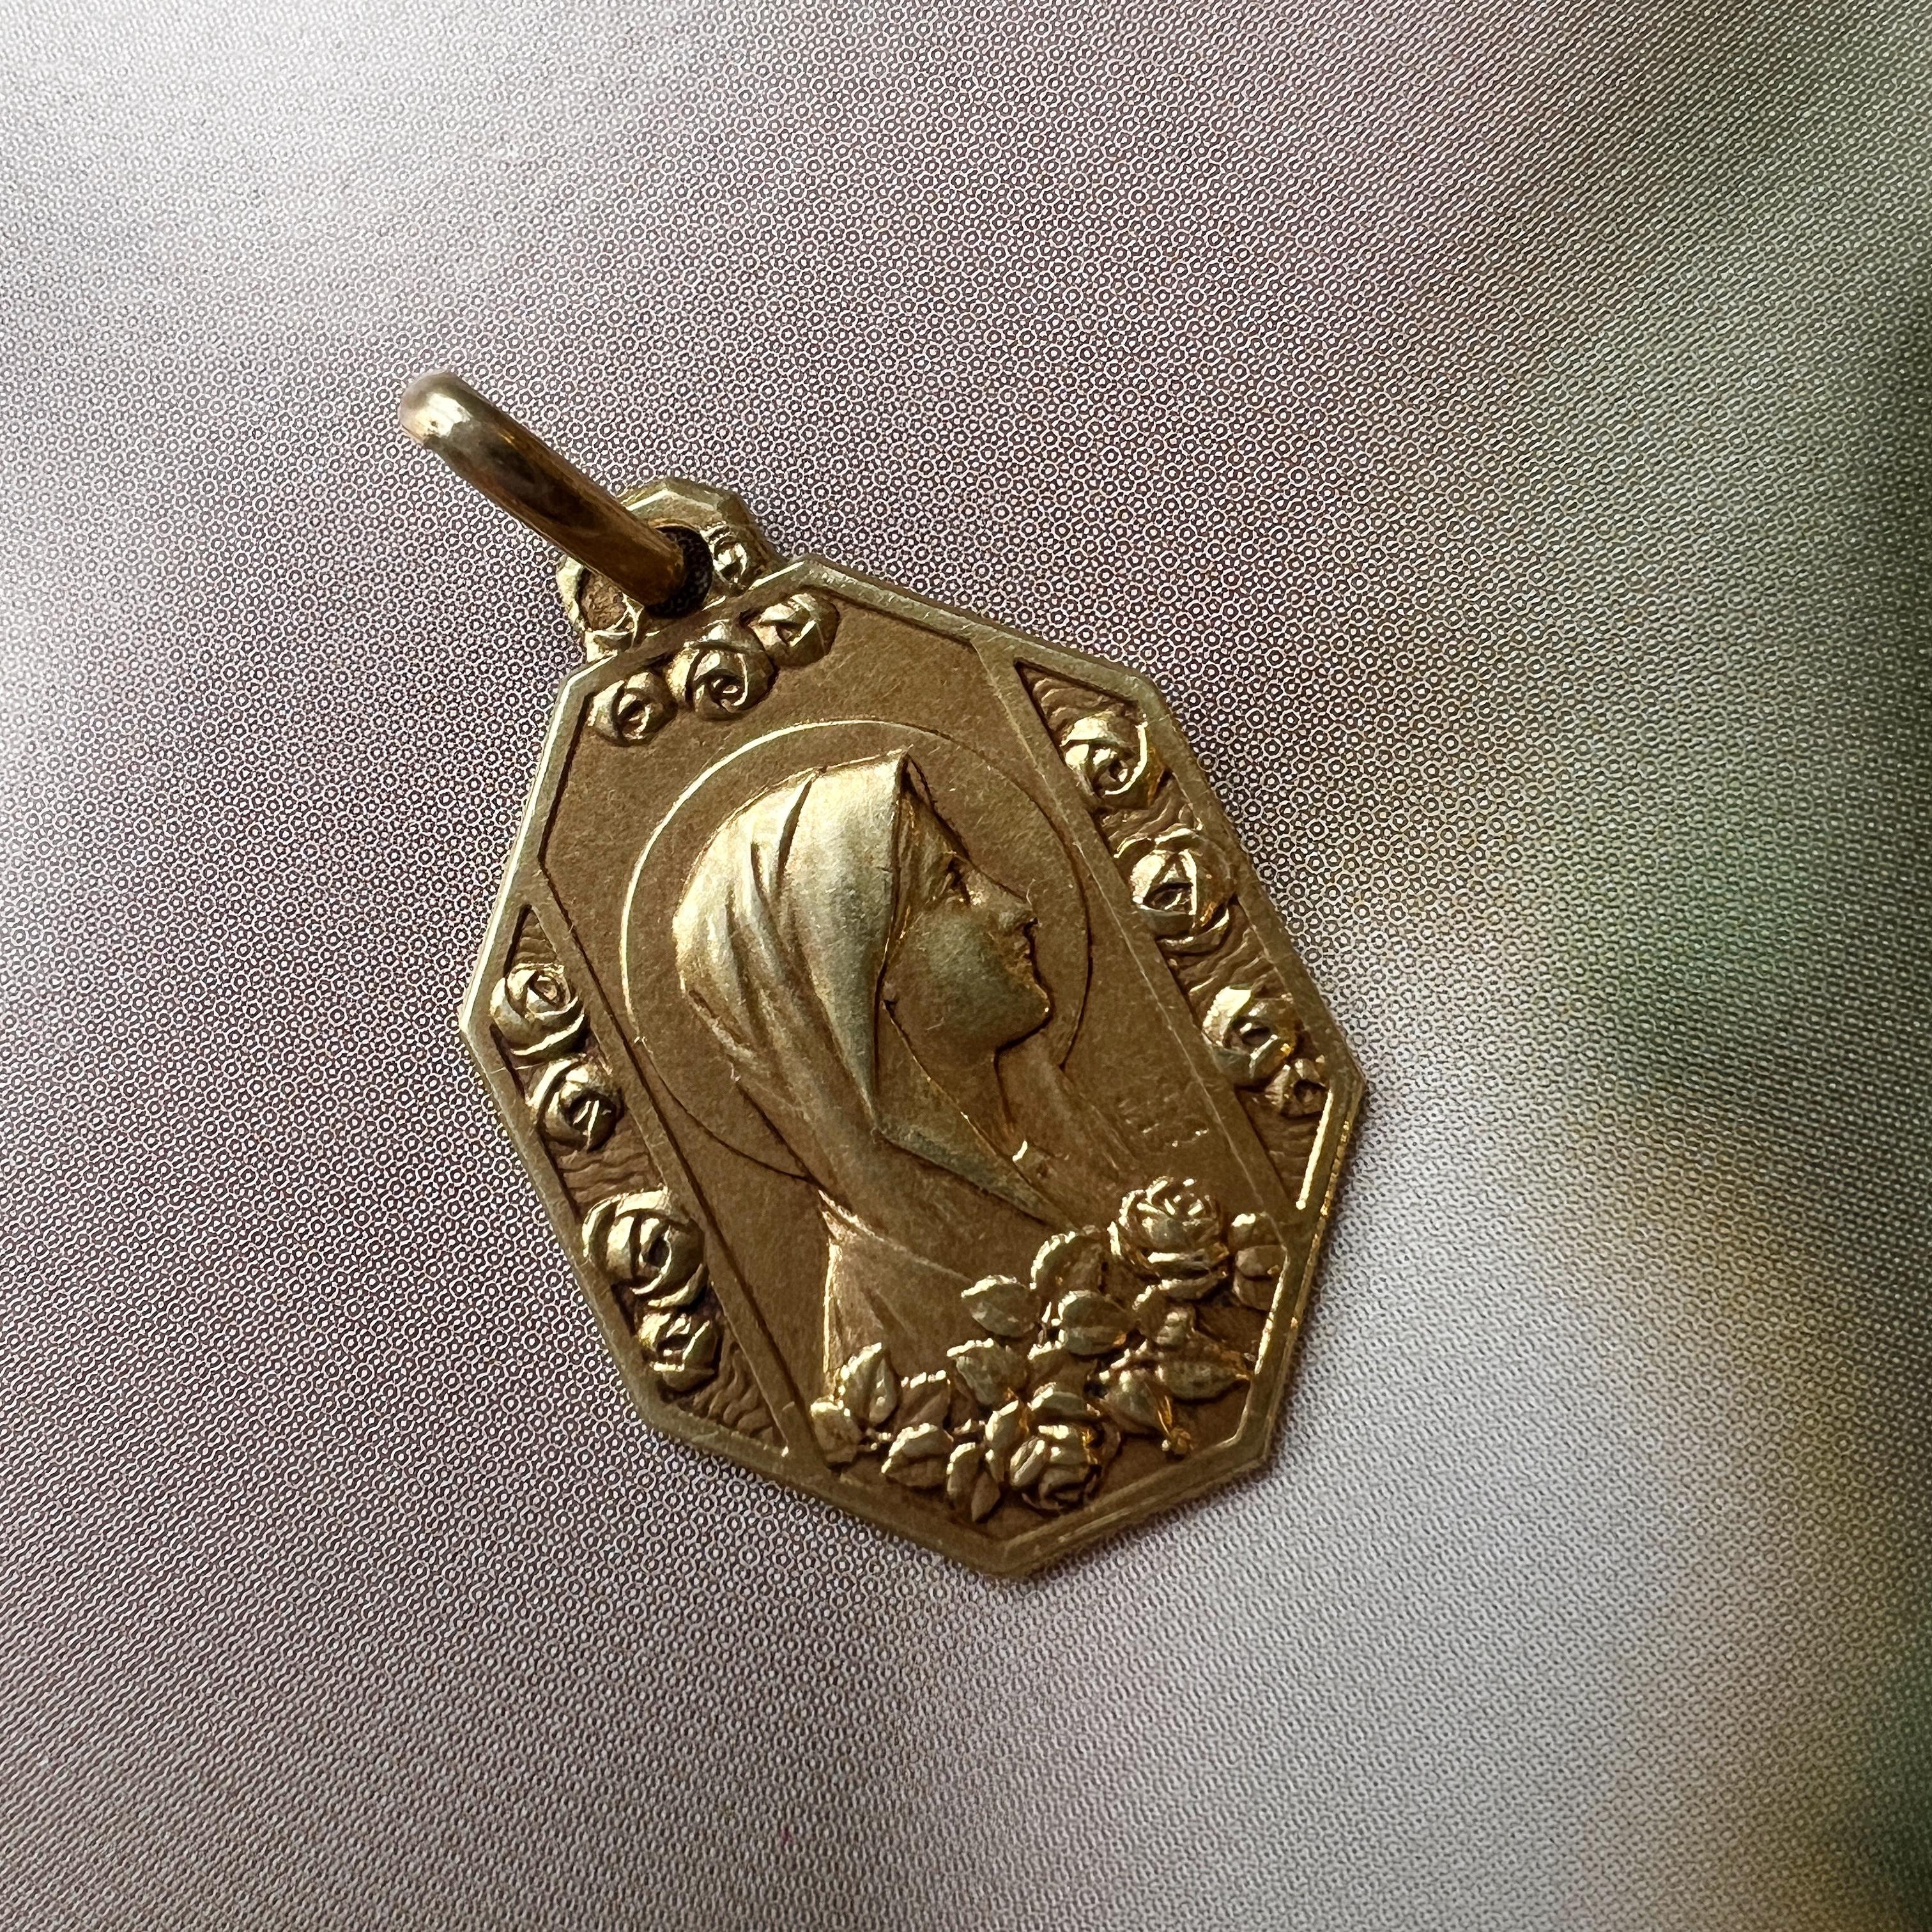 For sale a very beautiful French antique 18K medal pendant featuring the Virgin Mary on one side decorated with the delicate rose flowers. And on the other side, a praying scene refers to the appearance of the Virgin at Lourdes. The beautiful face